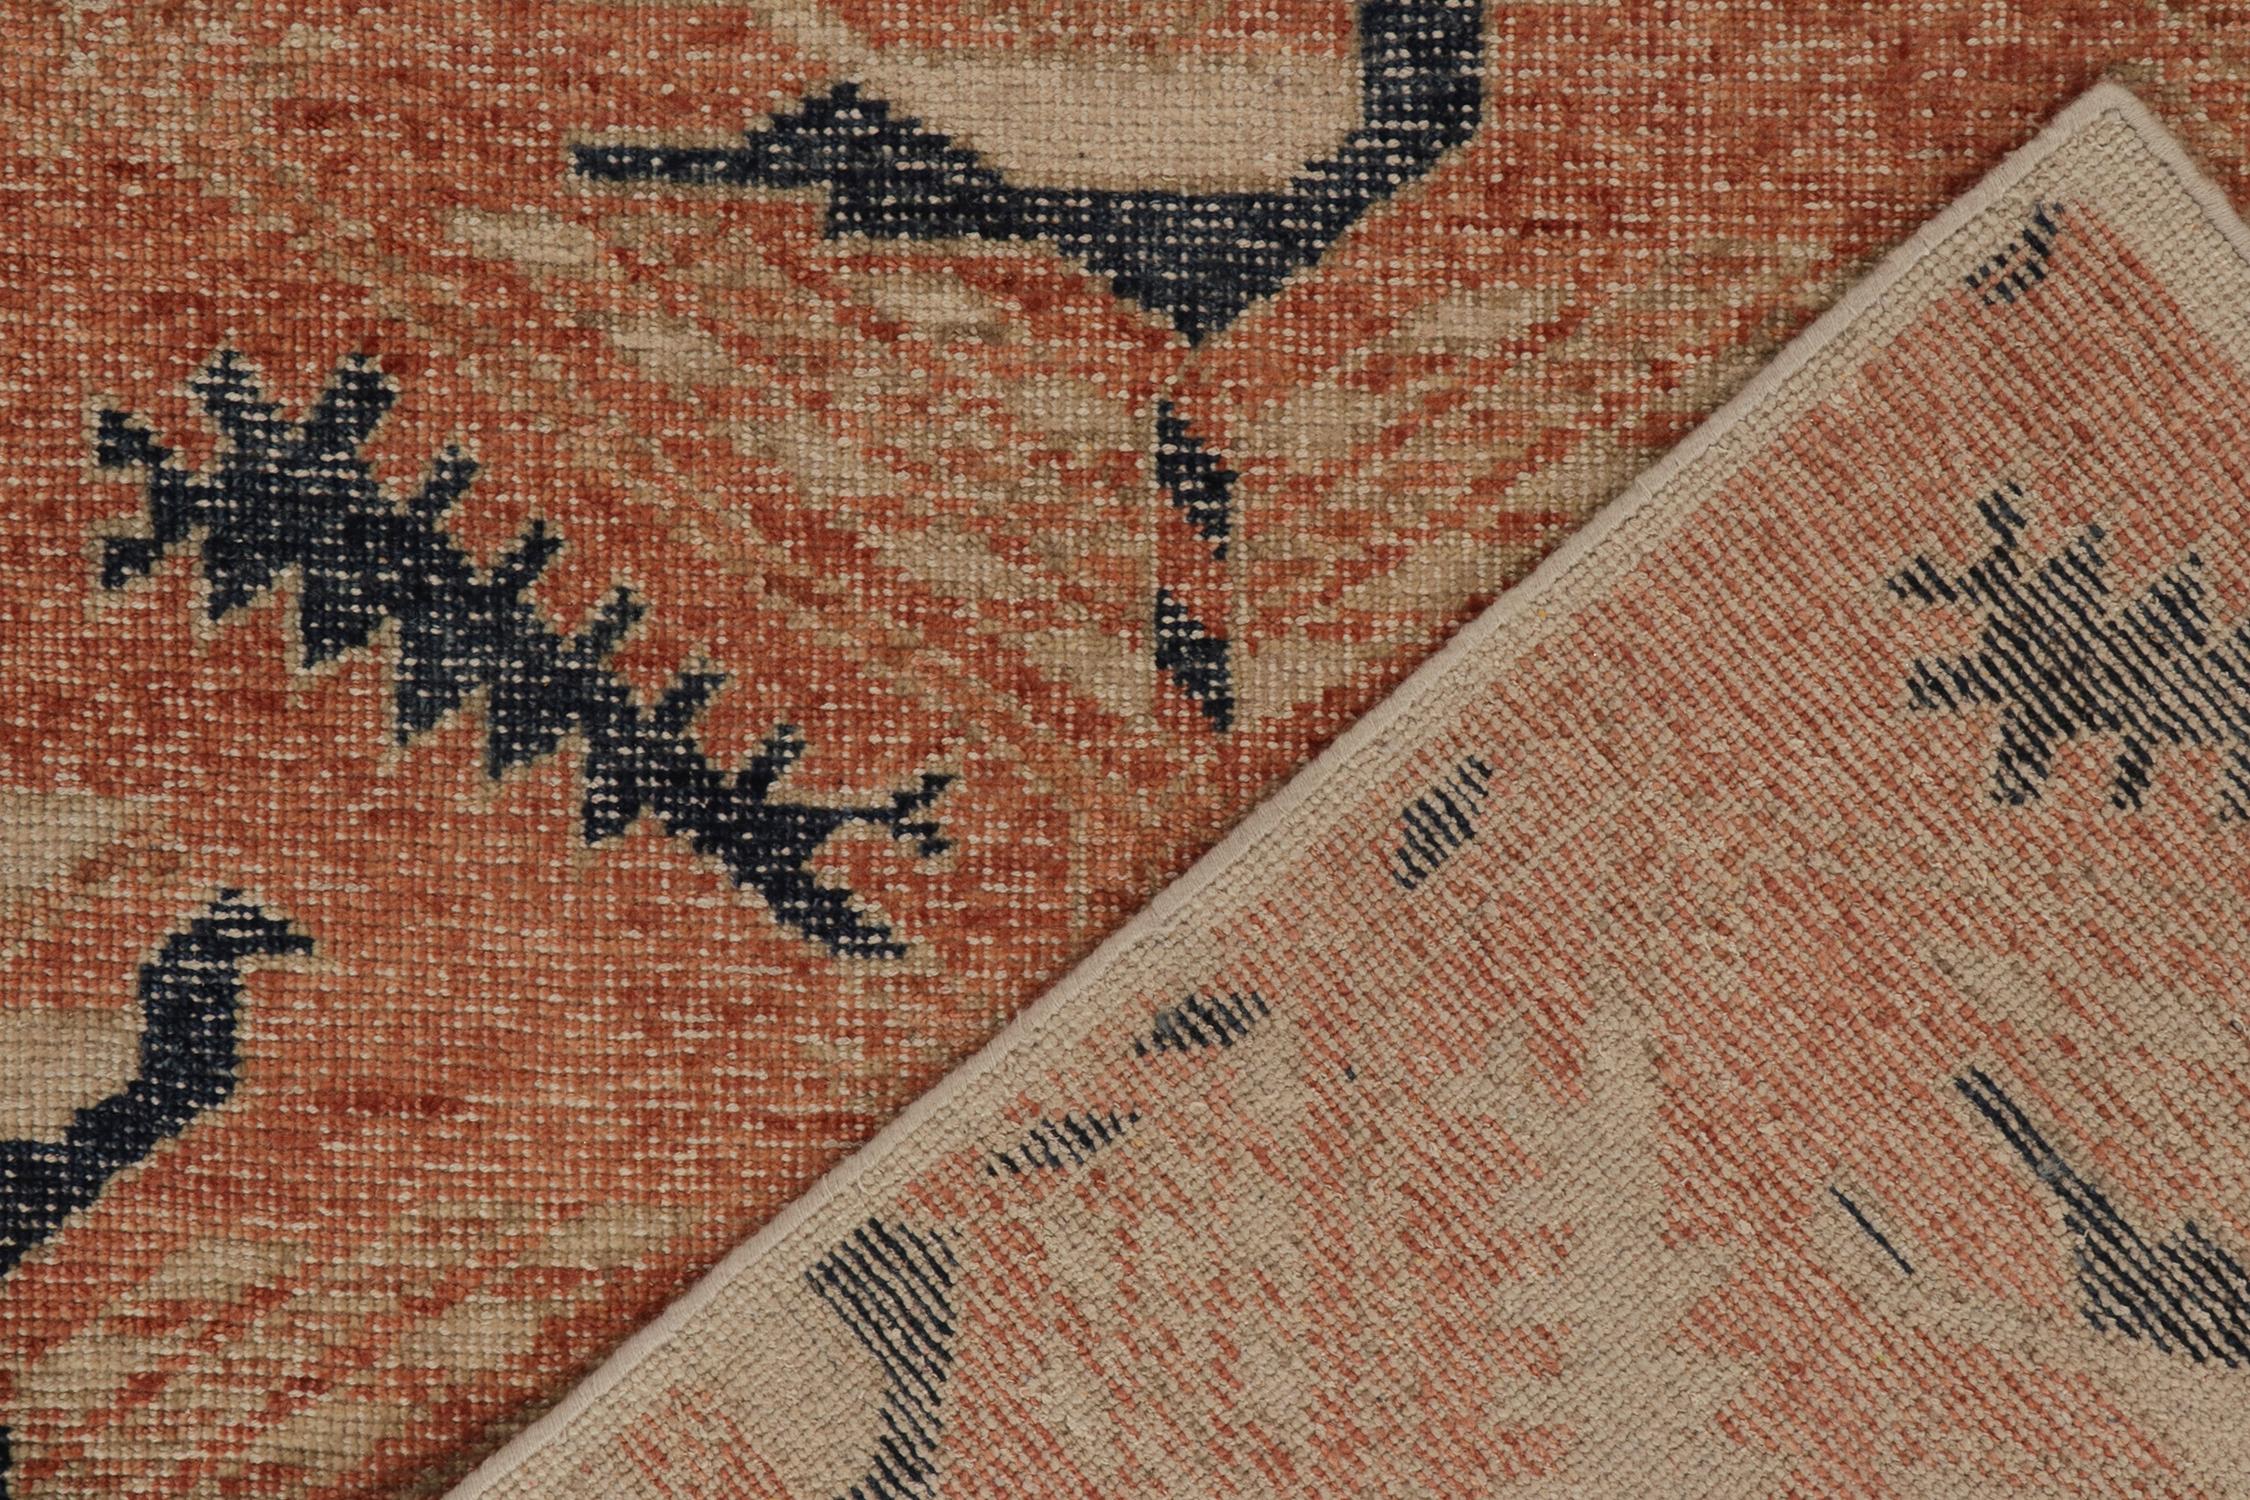 Contemporary Rug & Kilim’s Distressed Kuba Style Rug in Orange, Beige & Blue Tribal Patterns For Sale